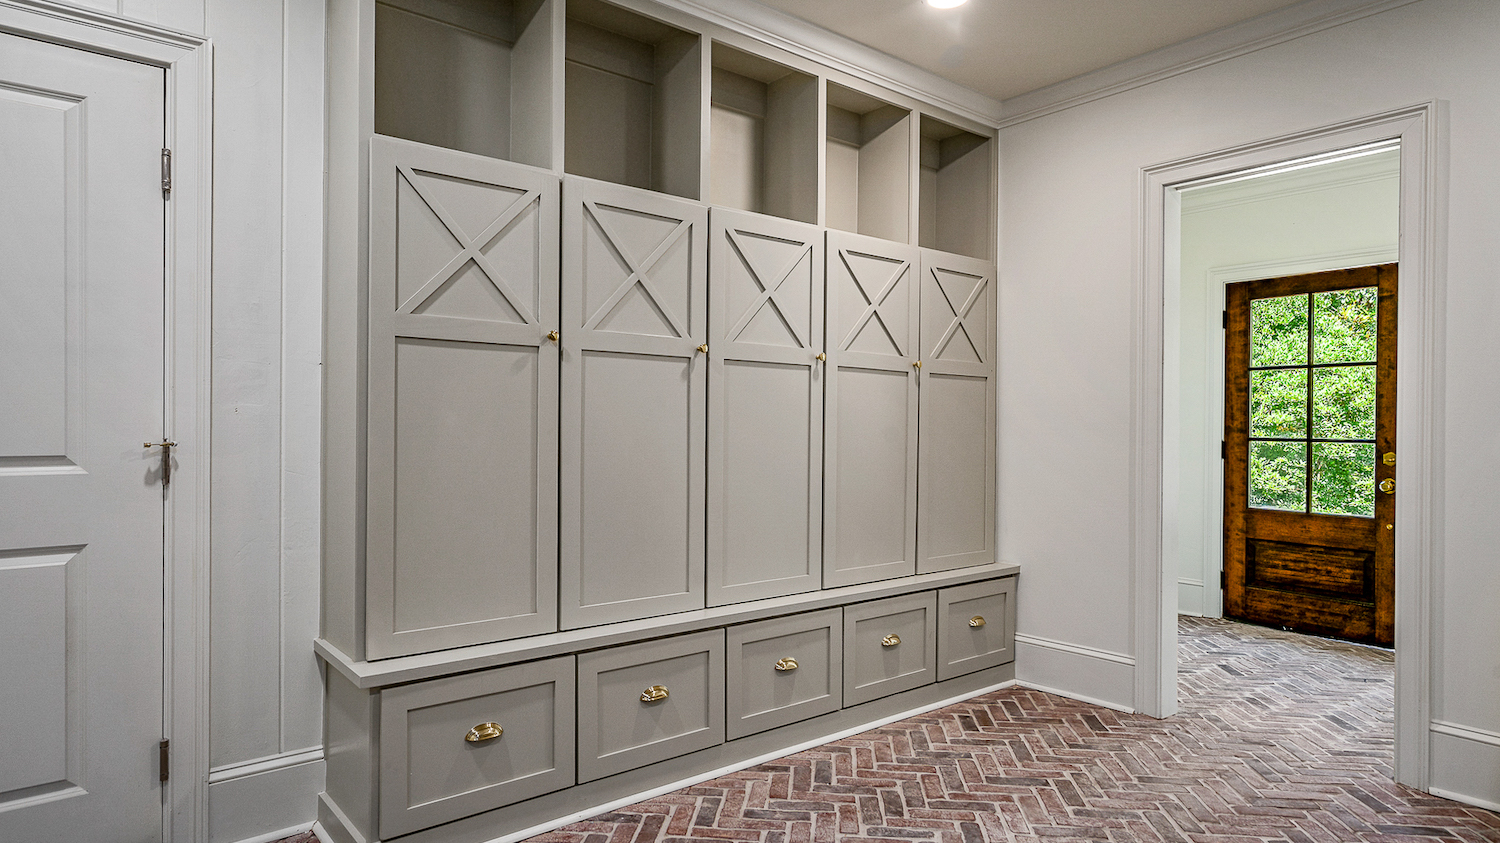 Classic City Five Points Full Renovation - Mudroom